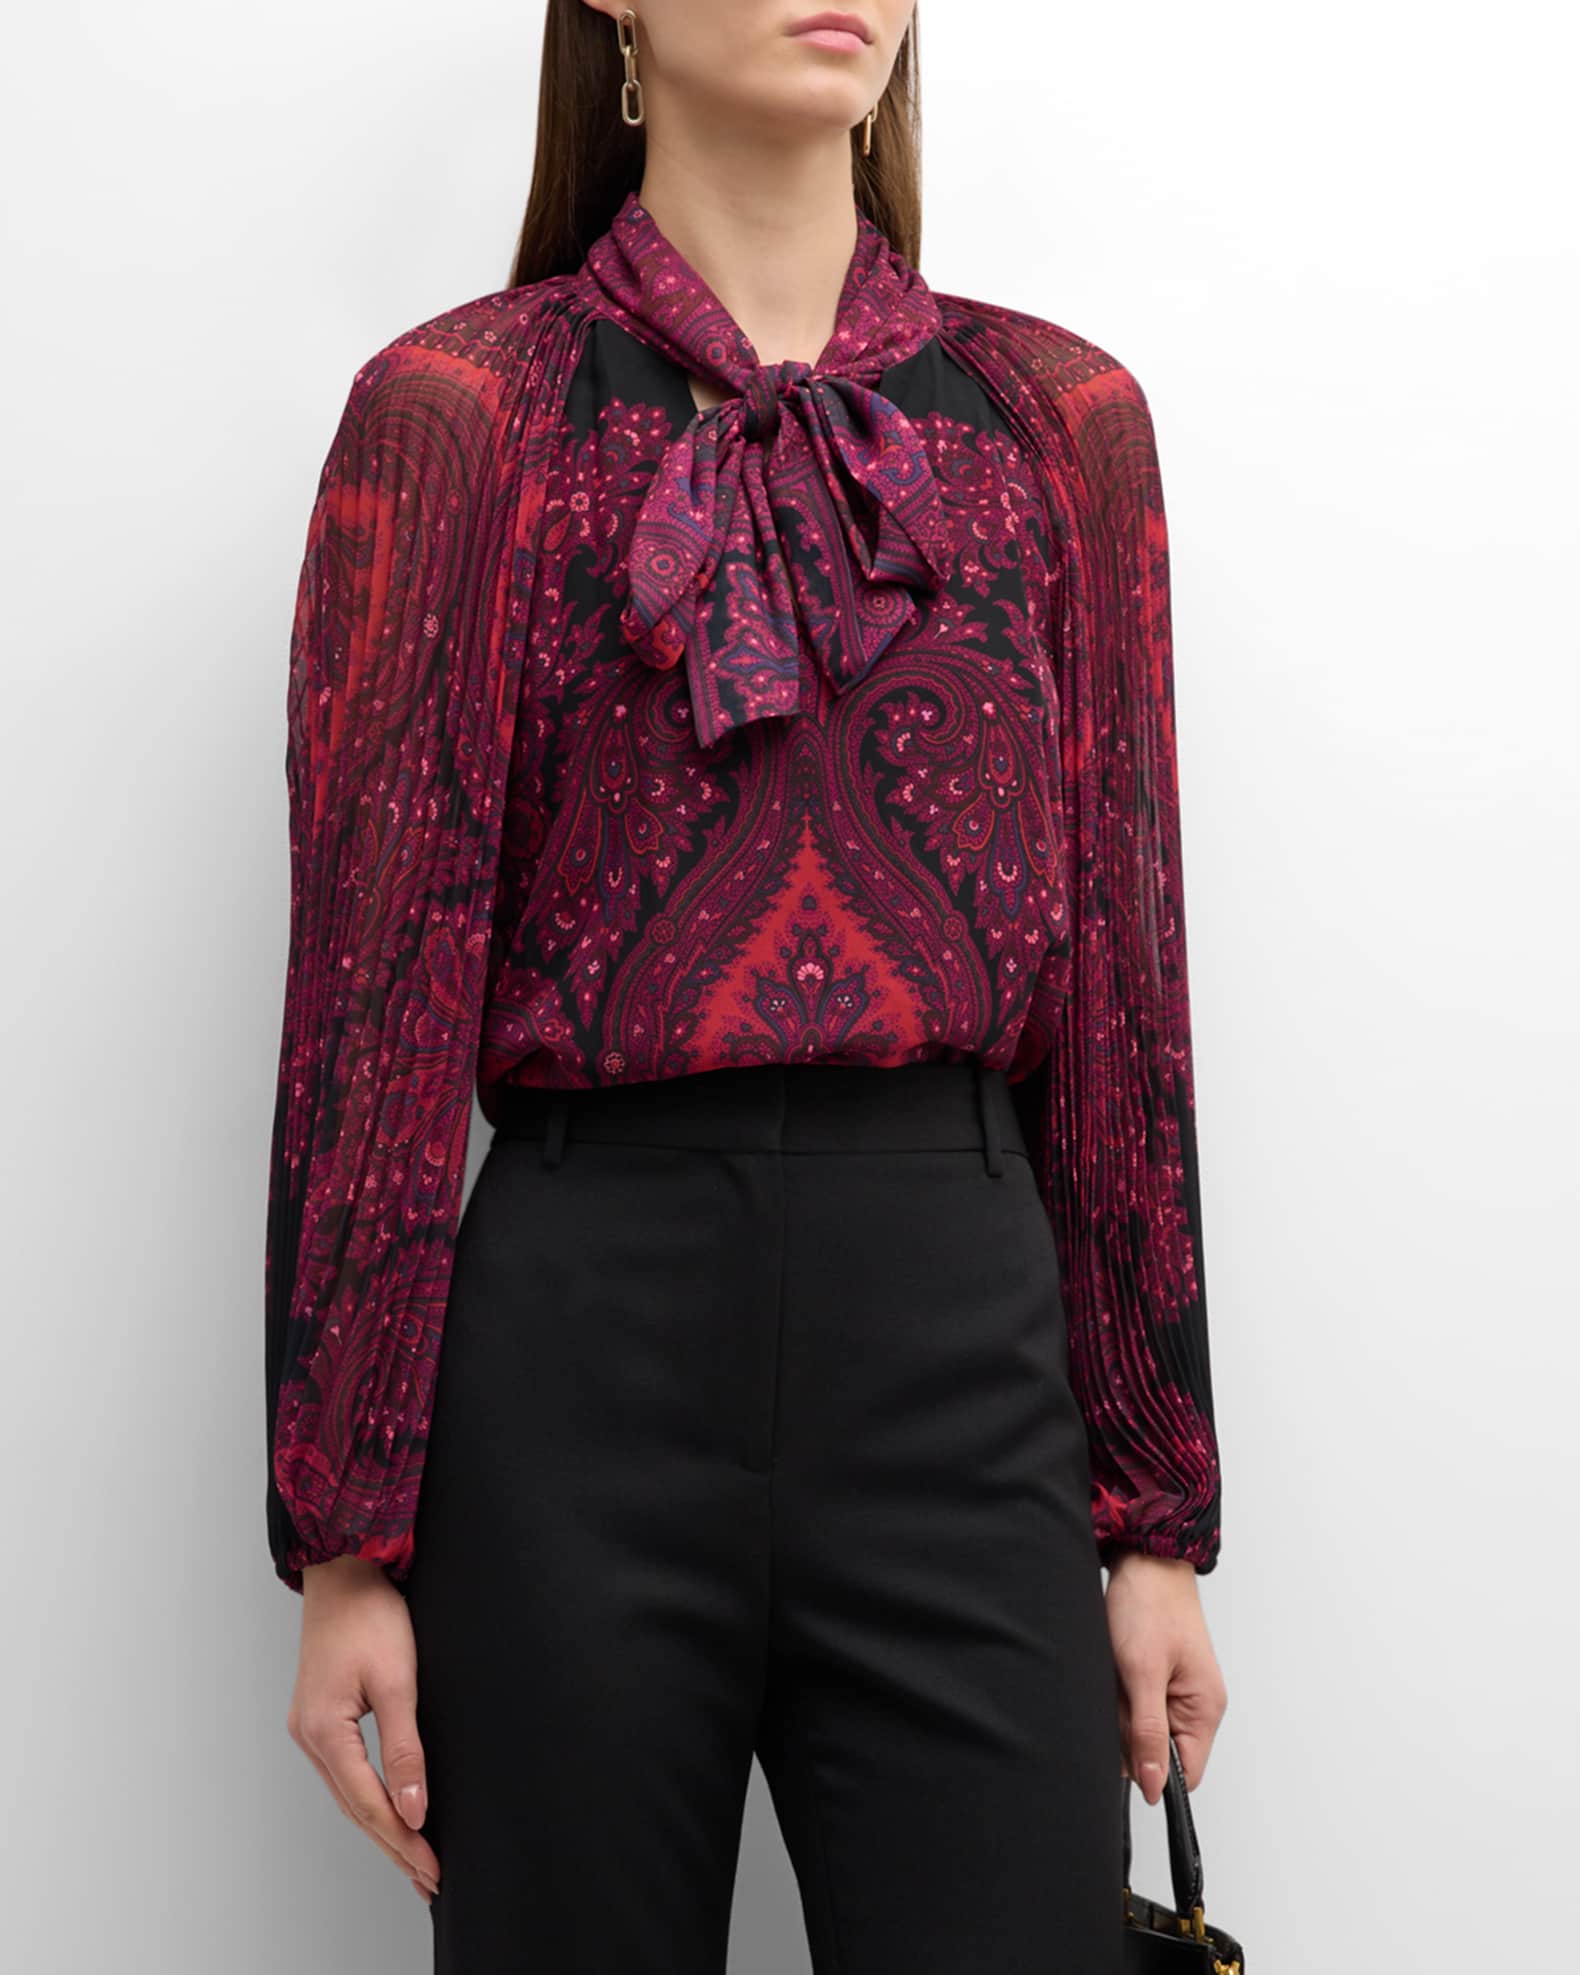 Red Paisley Print Deep Neck Blouse with full sleeve and Black